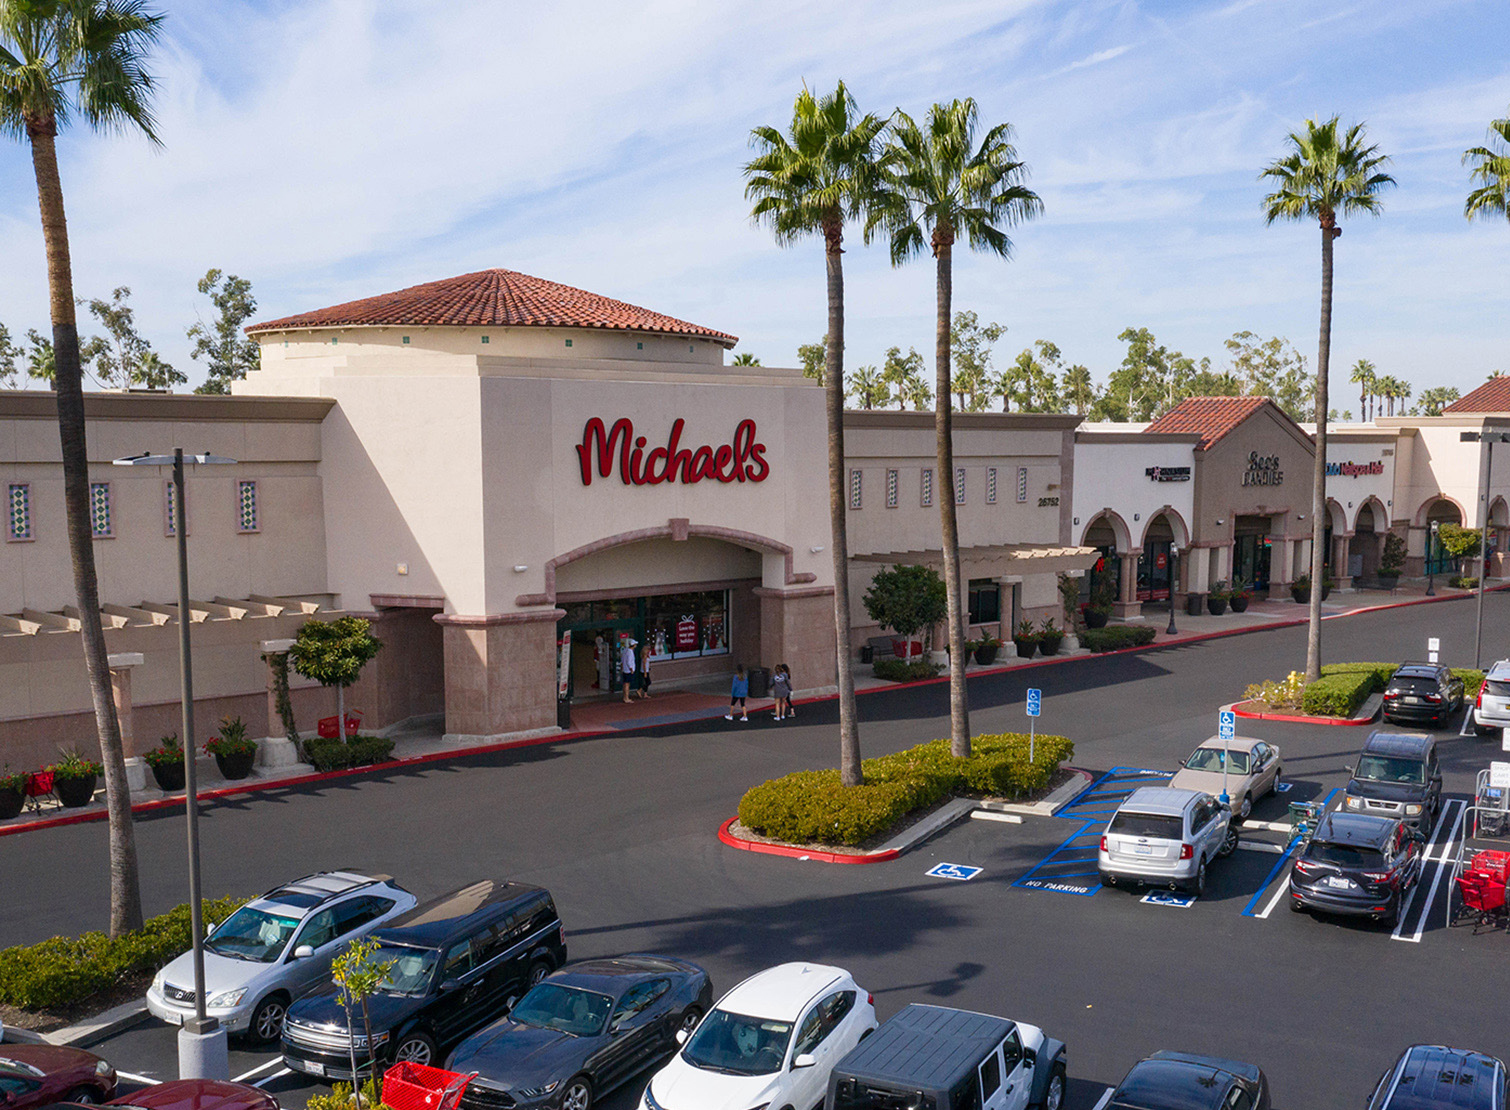 Hanley Investment Group Arranges Rare Sale of Single-Tenant Michaels in Orange County, Calif. for $4,850,000